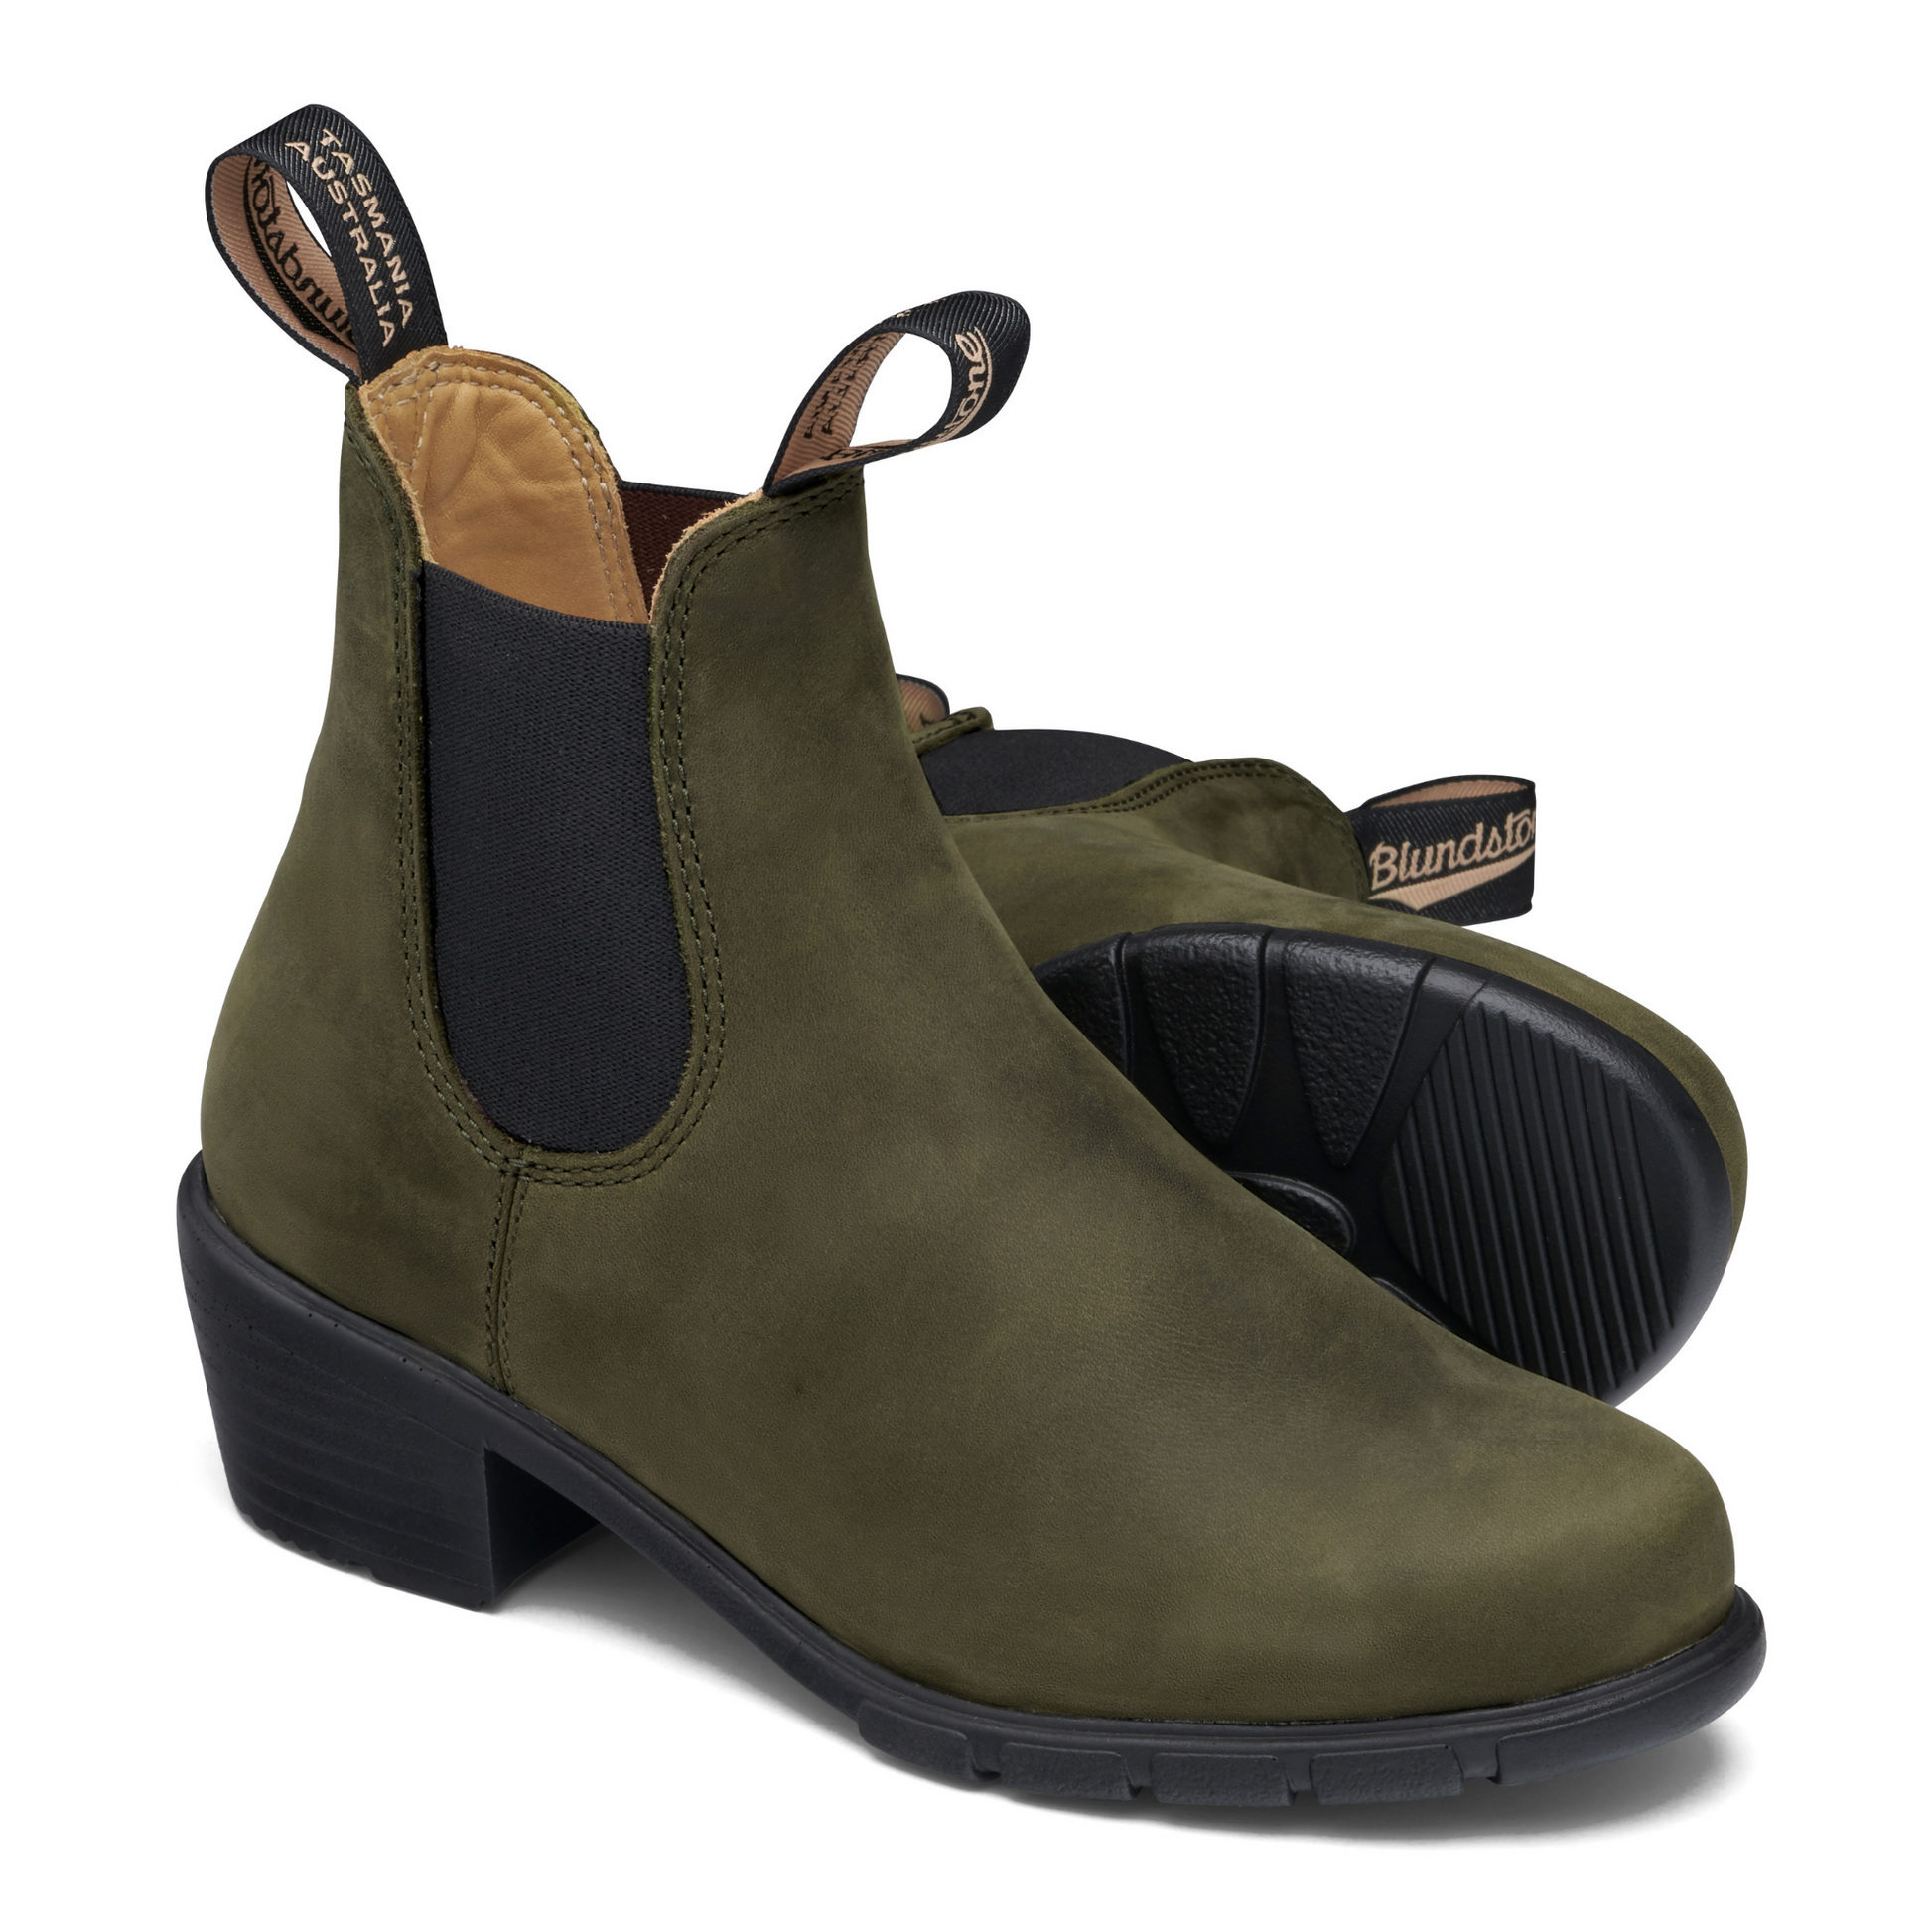 A pair of olive green women's boots with black elastic sides.